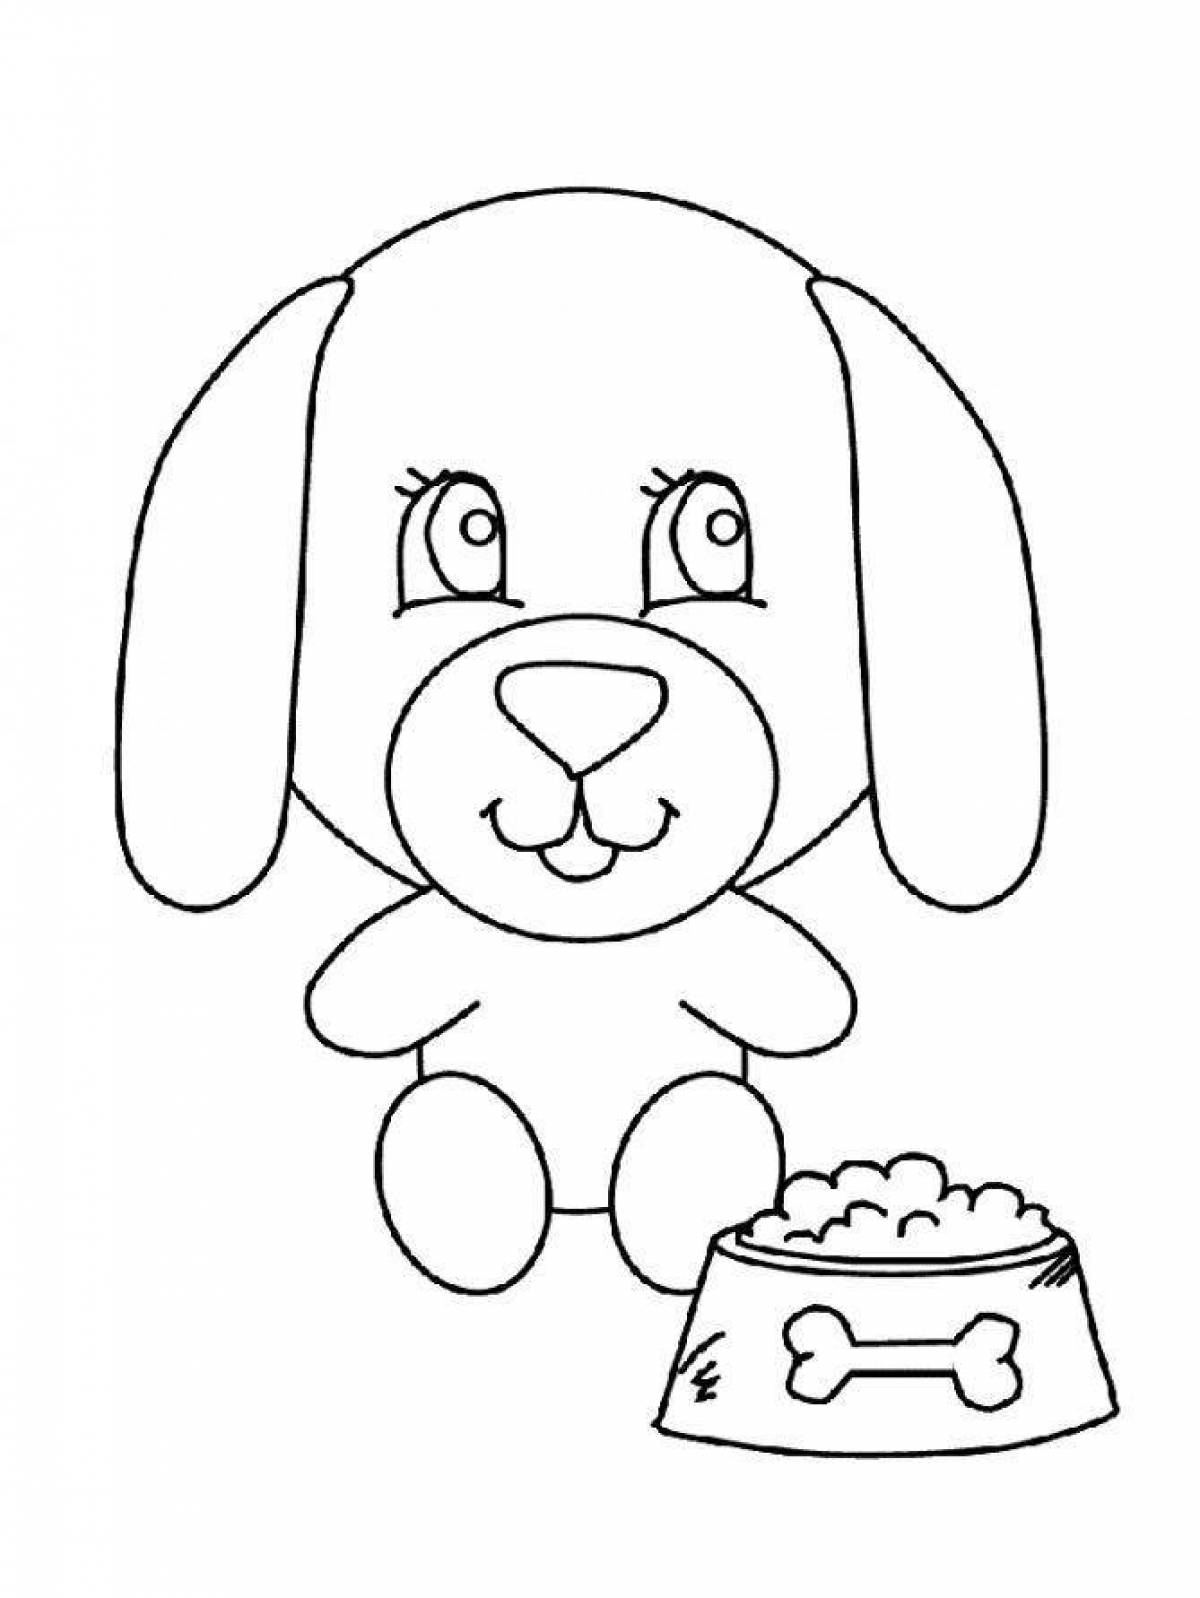 Adorable dog coloring book for 4-5 year olds